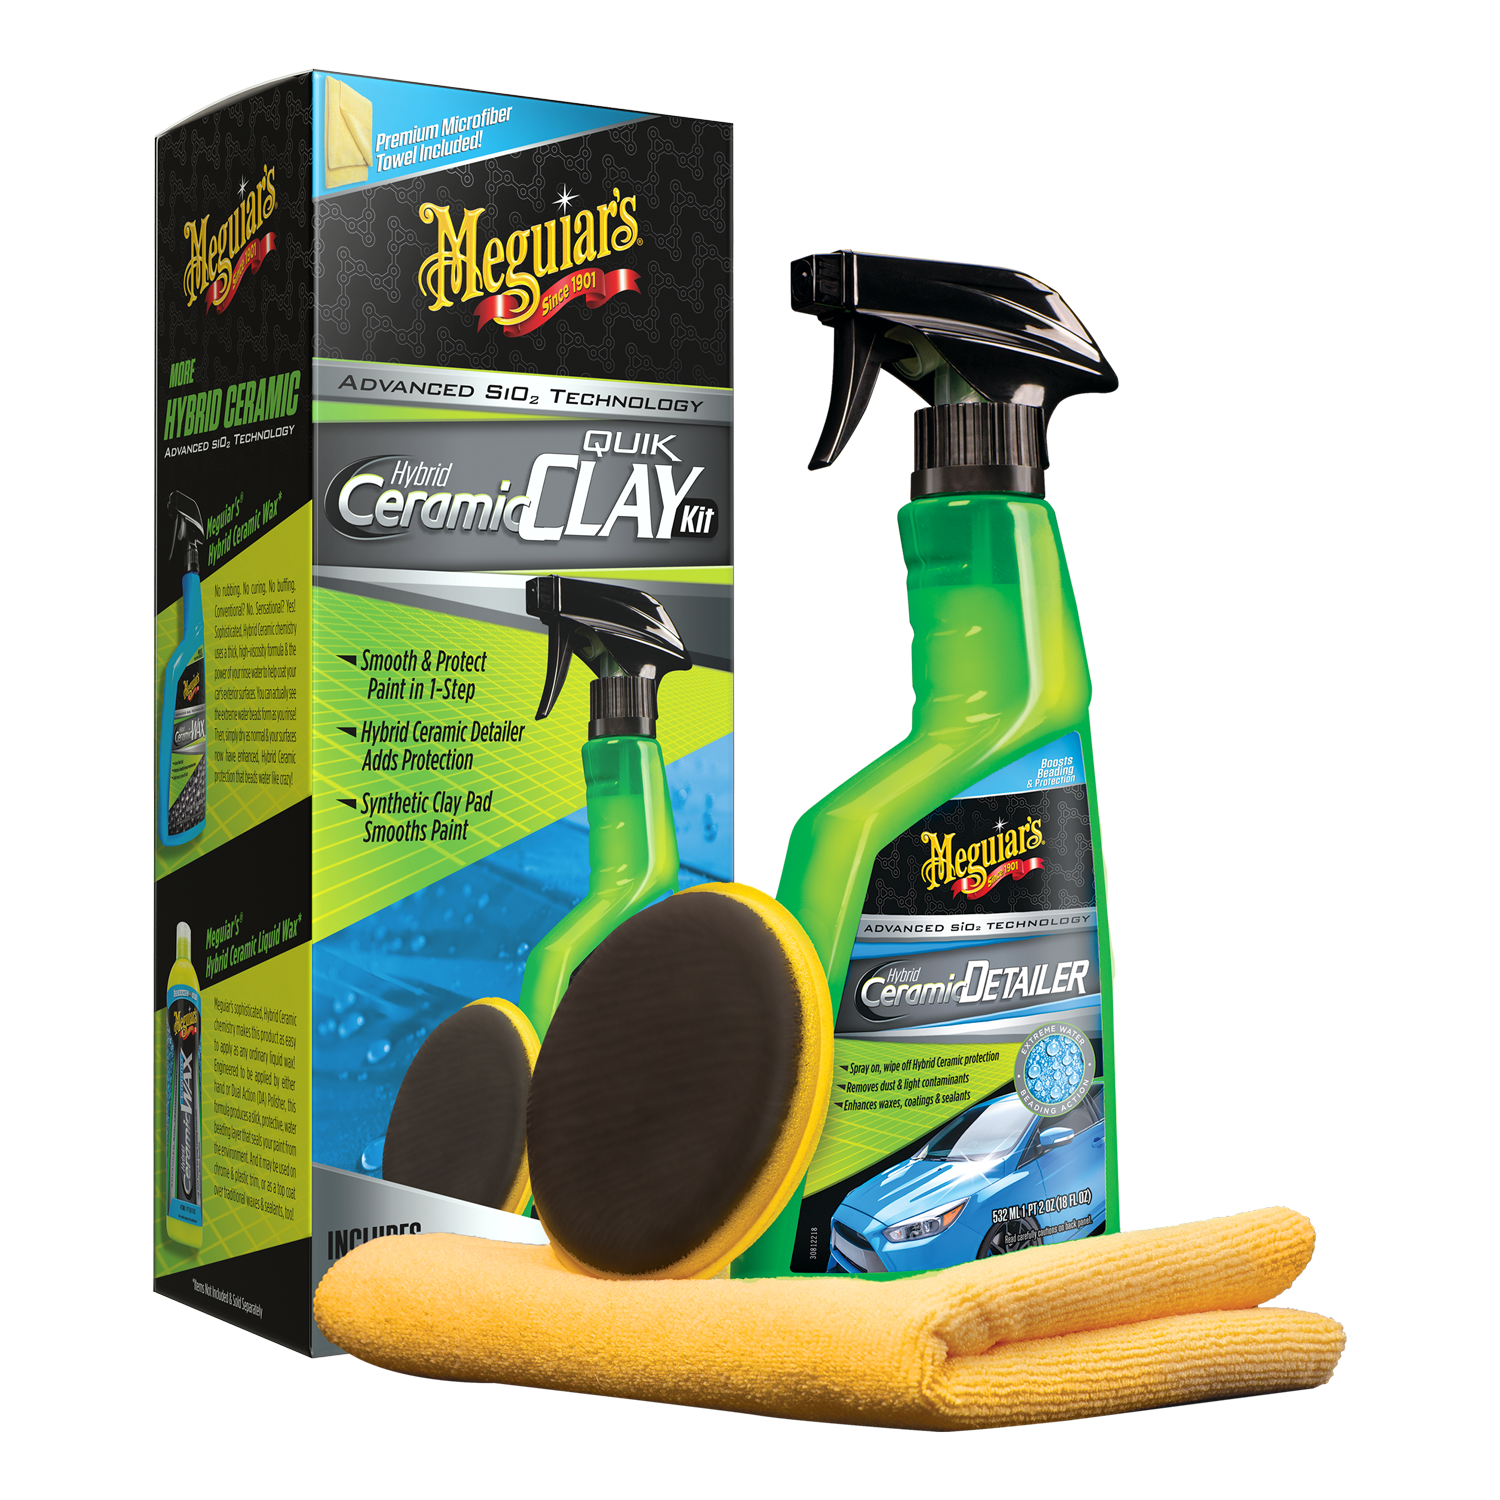 Ethos Car Care Clay Bar Kit- Synthetic Detailing Clay for Cars